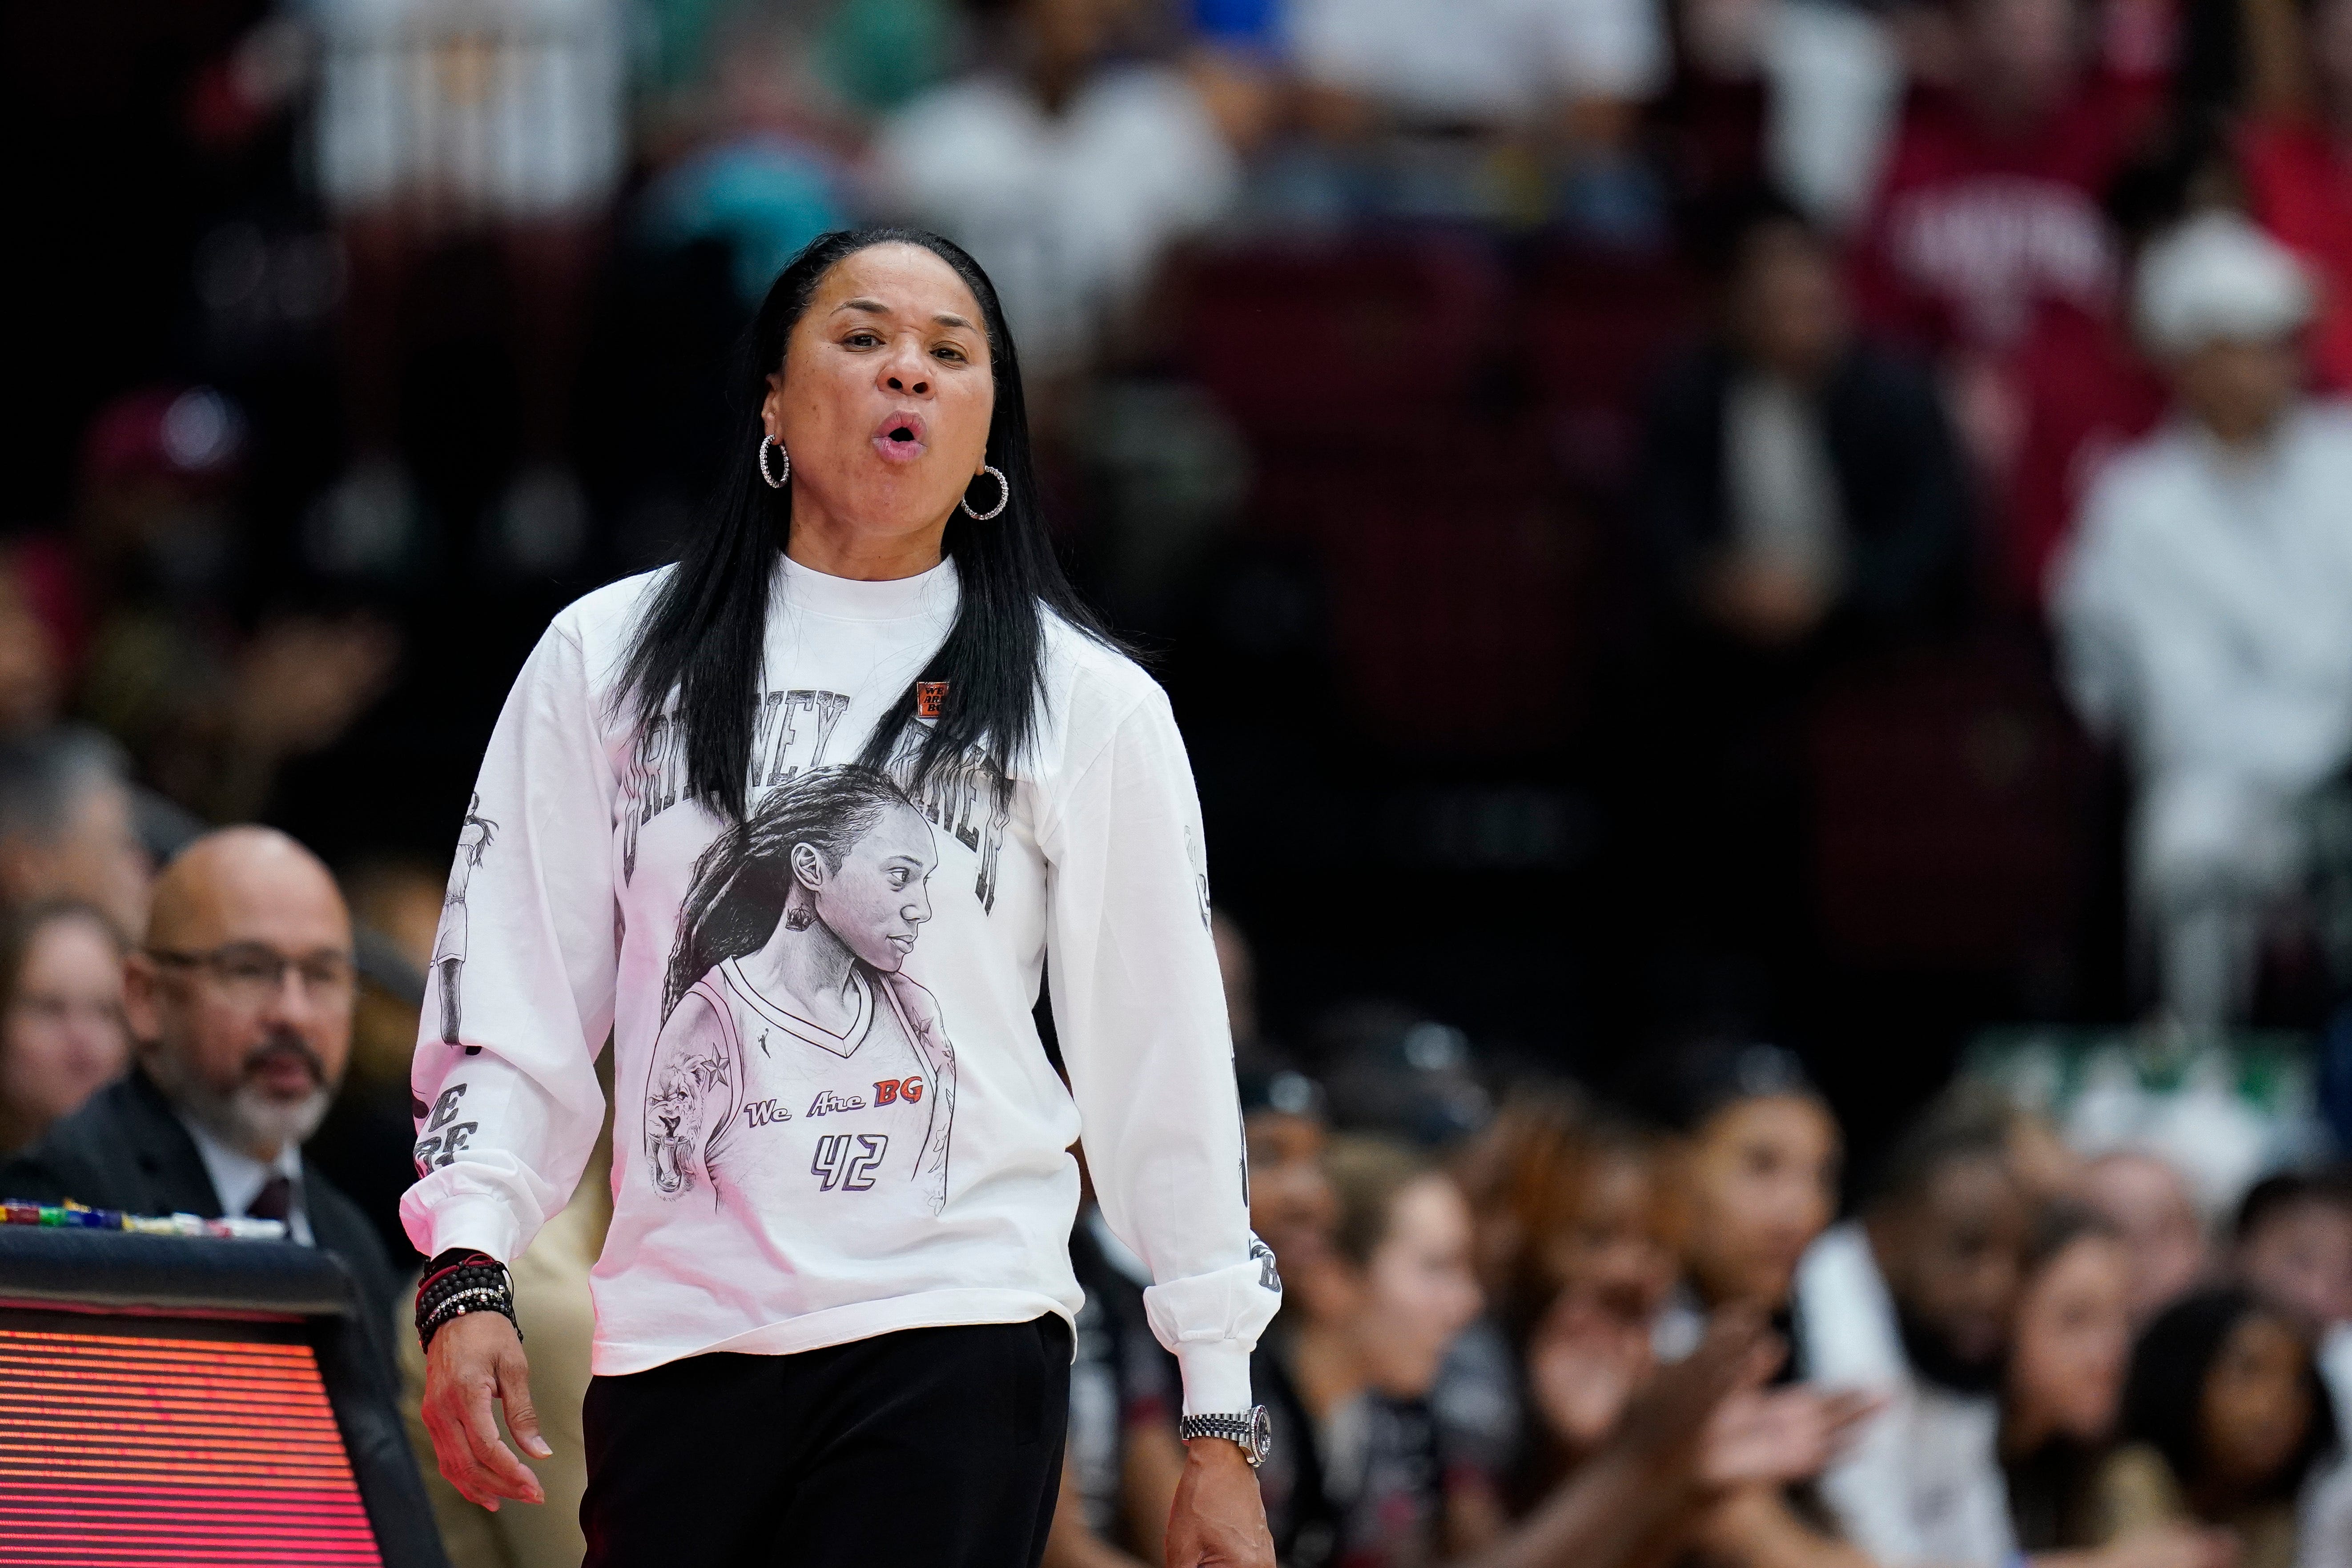 South Carolina head coach Dawn Staley is one of USA TODAY's Women of the Year.